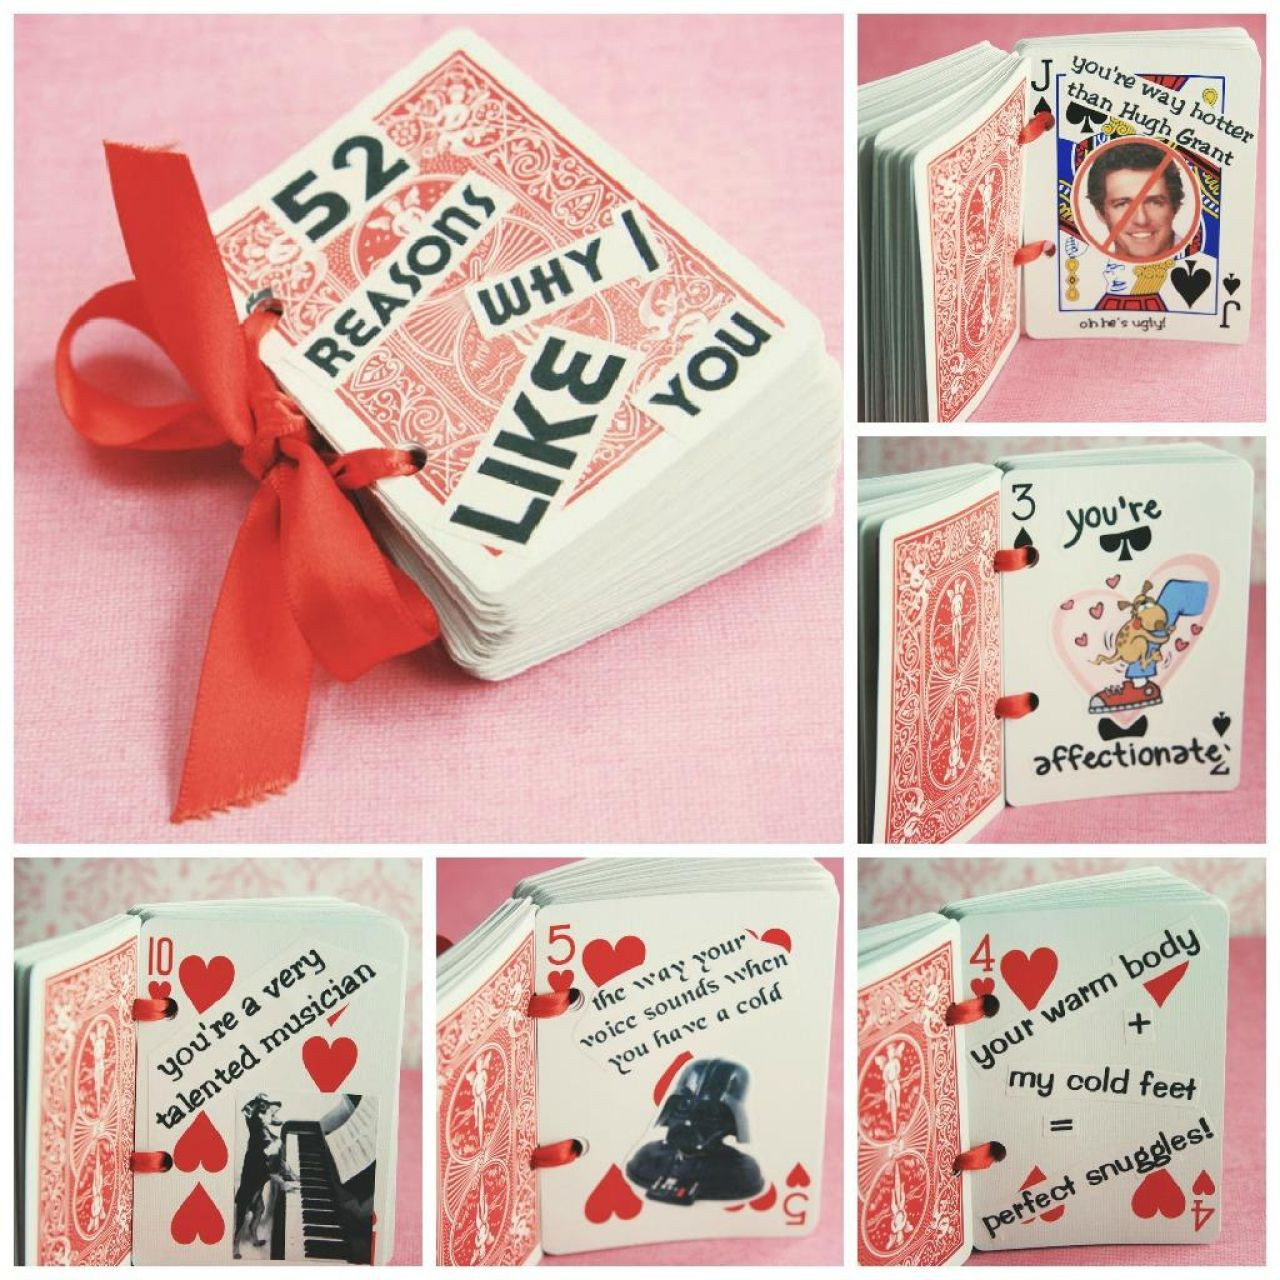 Cute Valentines Day Ideas For Him
 17 Last Minute Handmade Valentine Gifts for Him